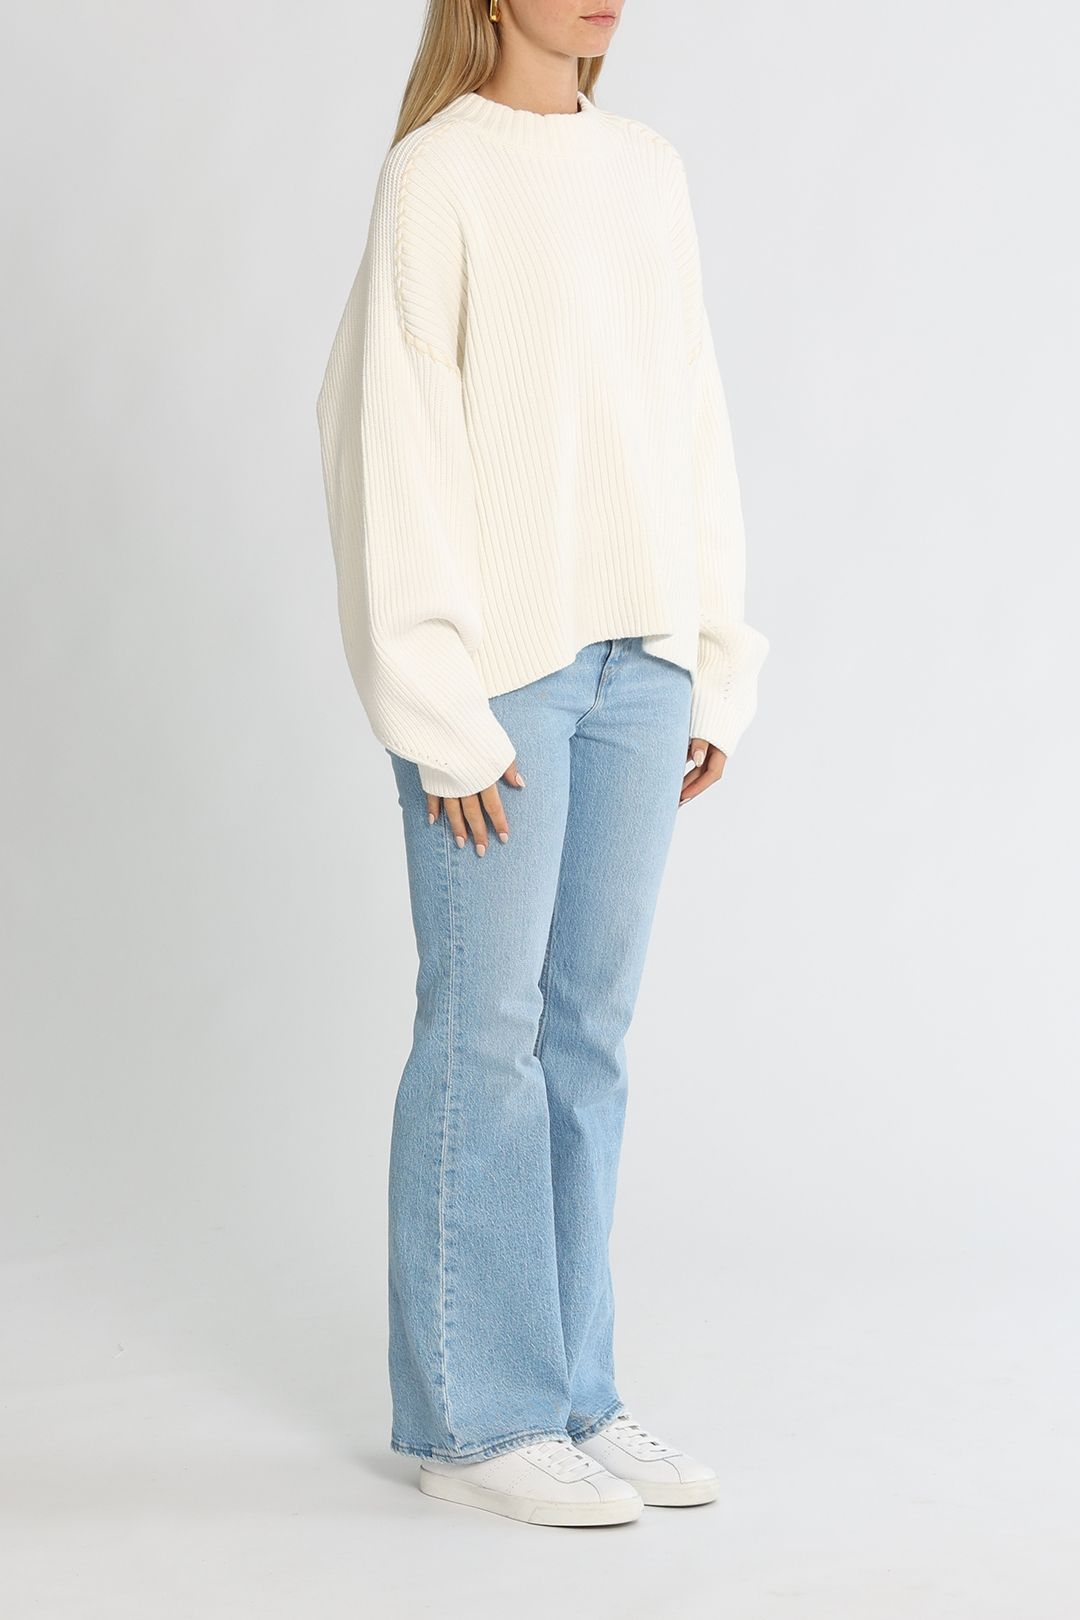 C&M Camilla and Marc Ray Knit Crew Frost Long Sleeves